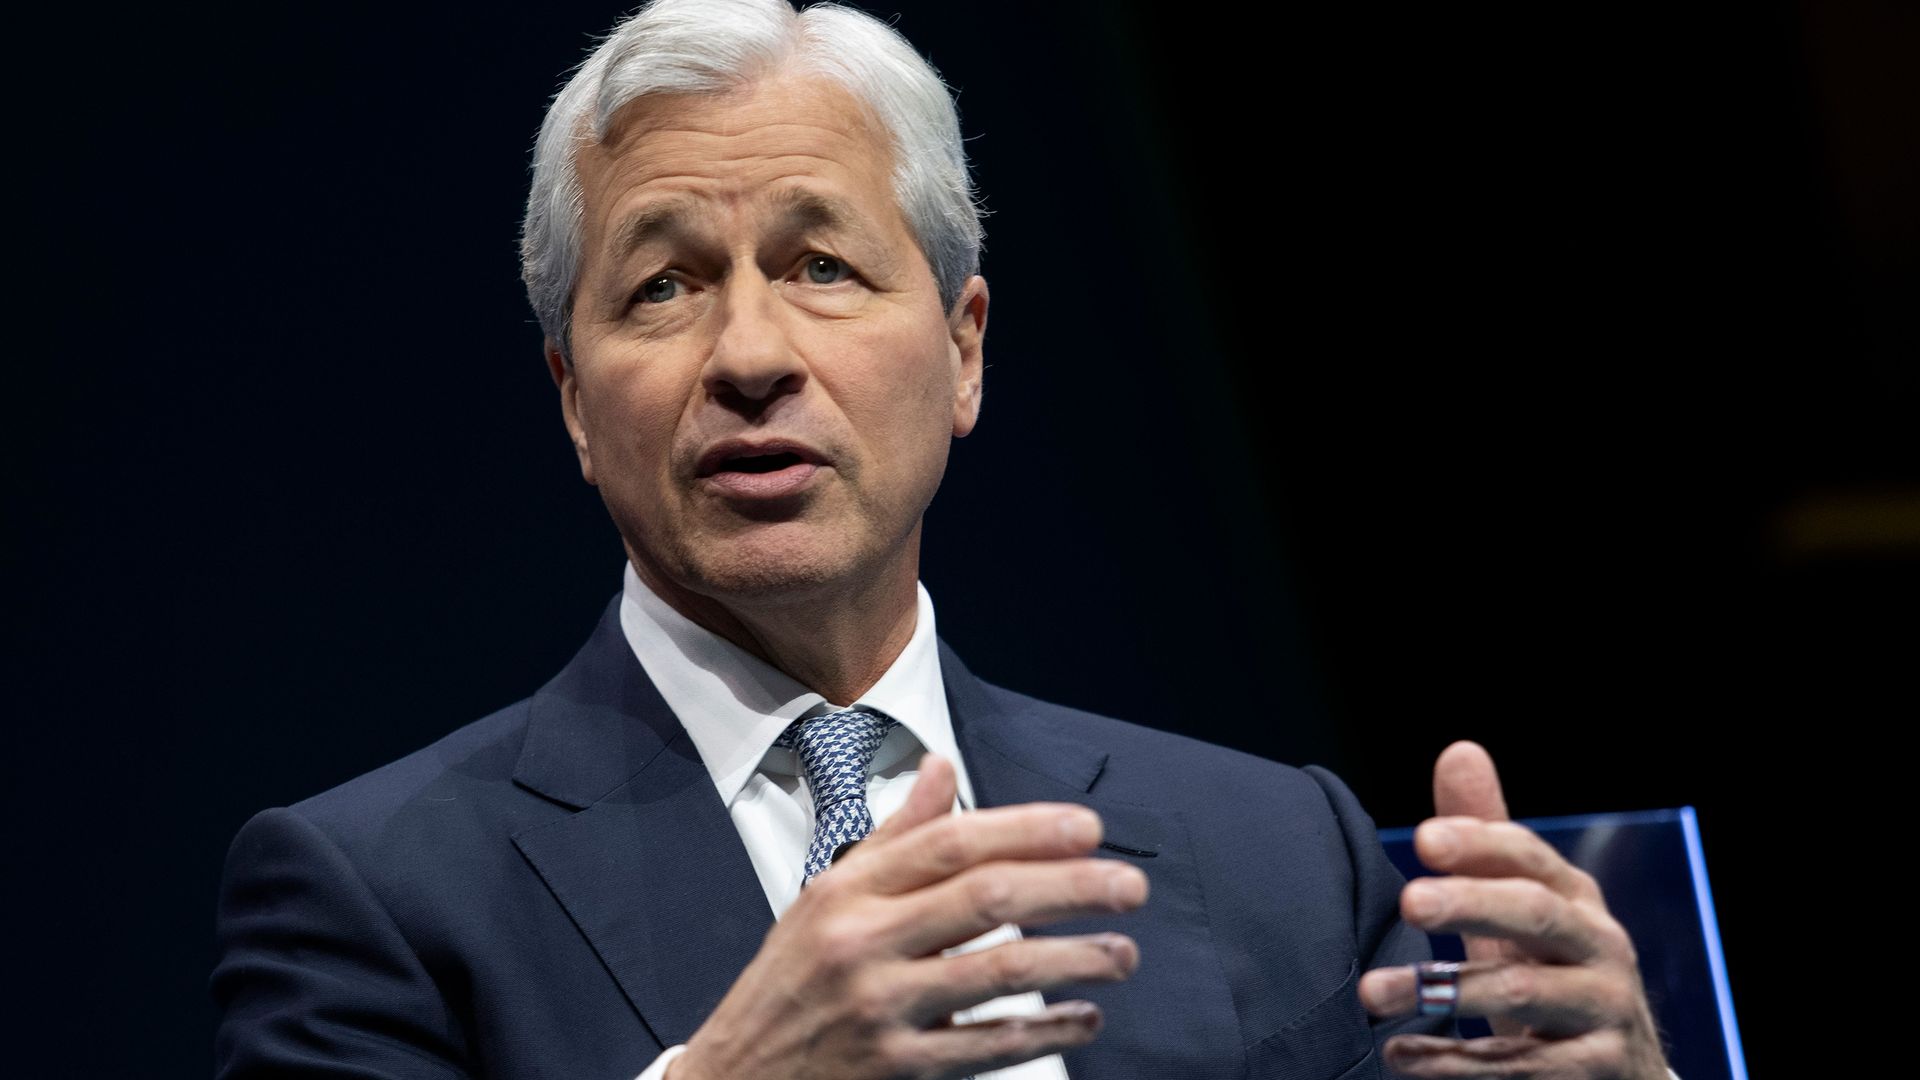 JPMorgan Chase & Co. CEO Jamie Dimon speaks during the Business Roundtable CEO Innovation Summit in Washington, DC on December 6, 2018